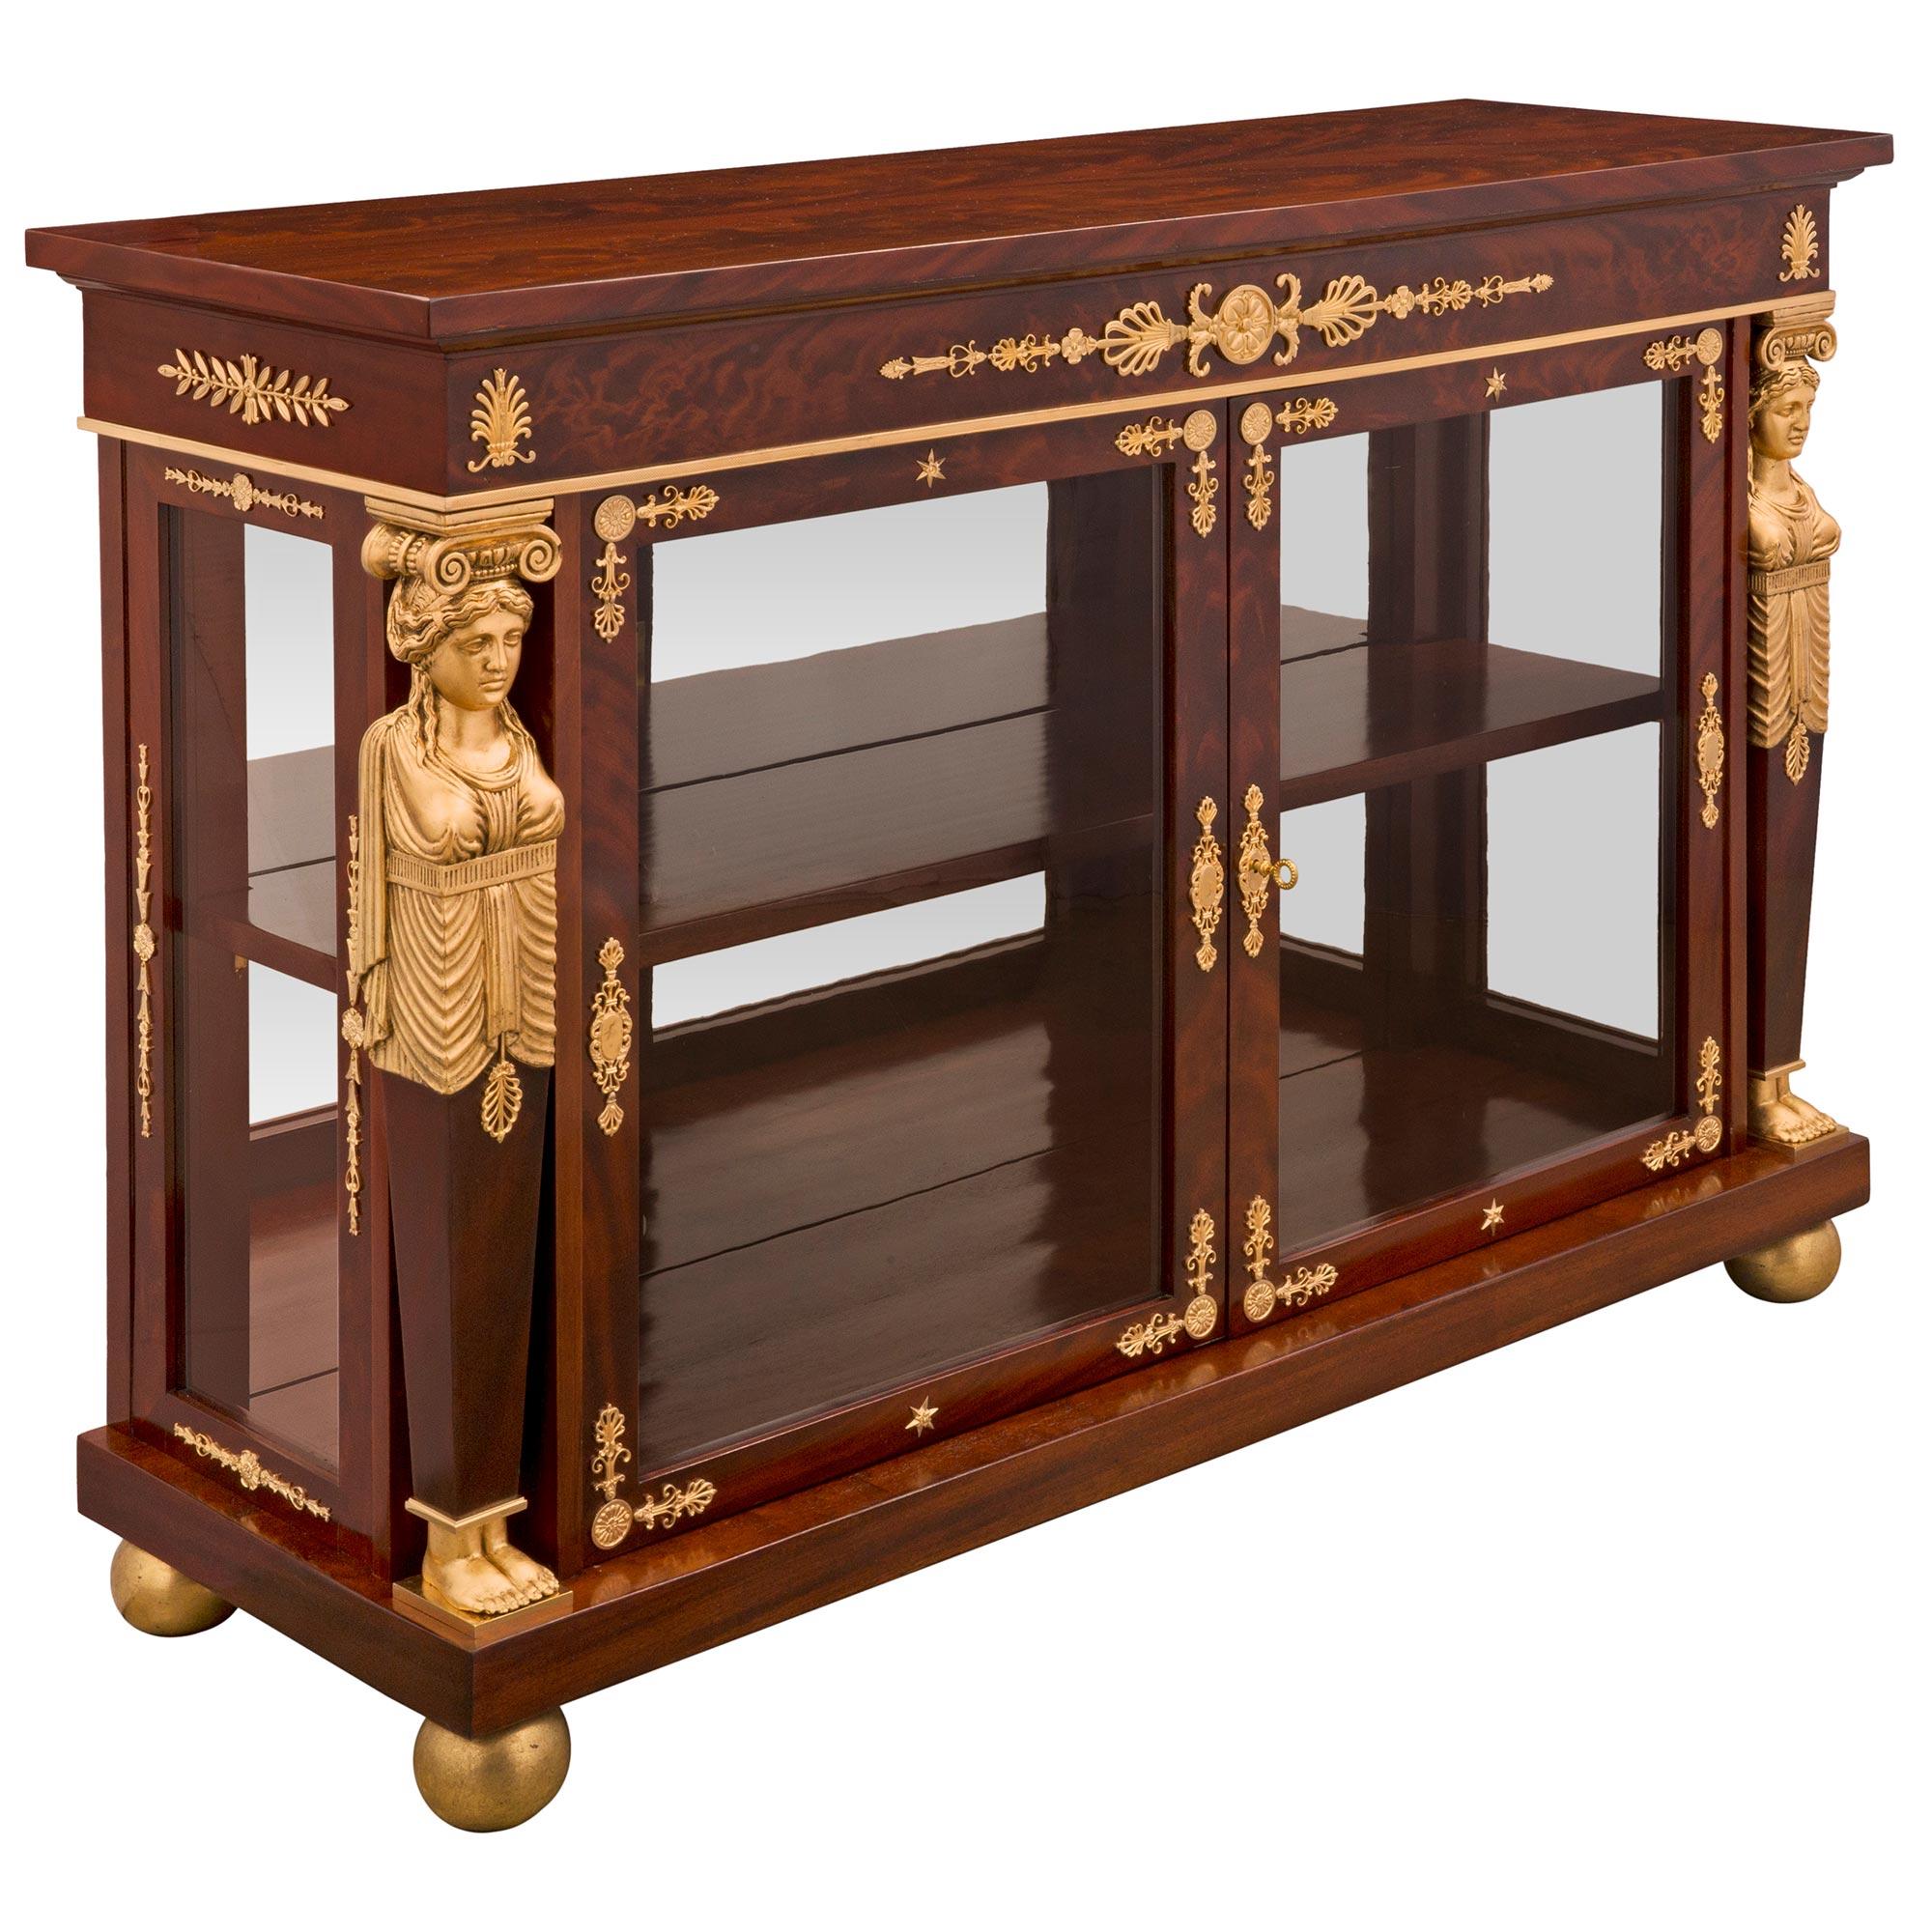 French 19th Century 1st Empire Period Mahogany, Ormolu, and Giltwood Vitrine In Good Condition For Sale In West Palm Beach, FL